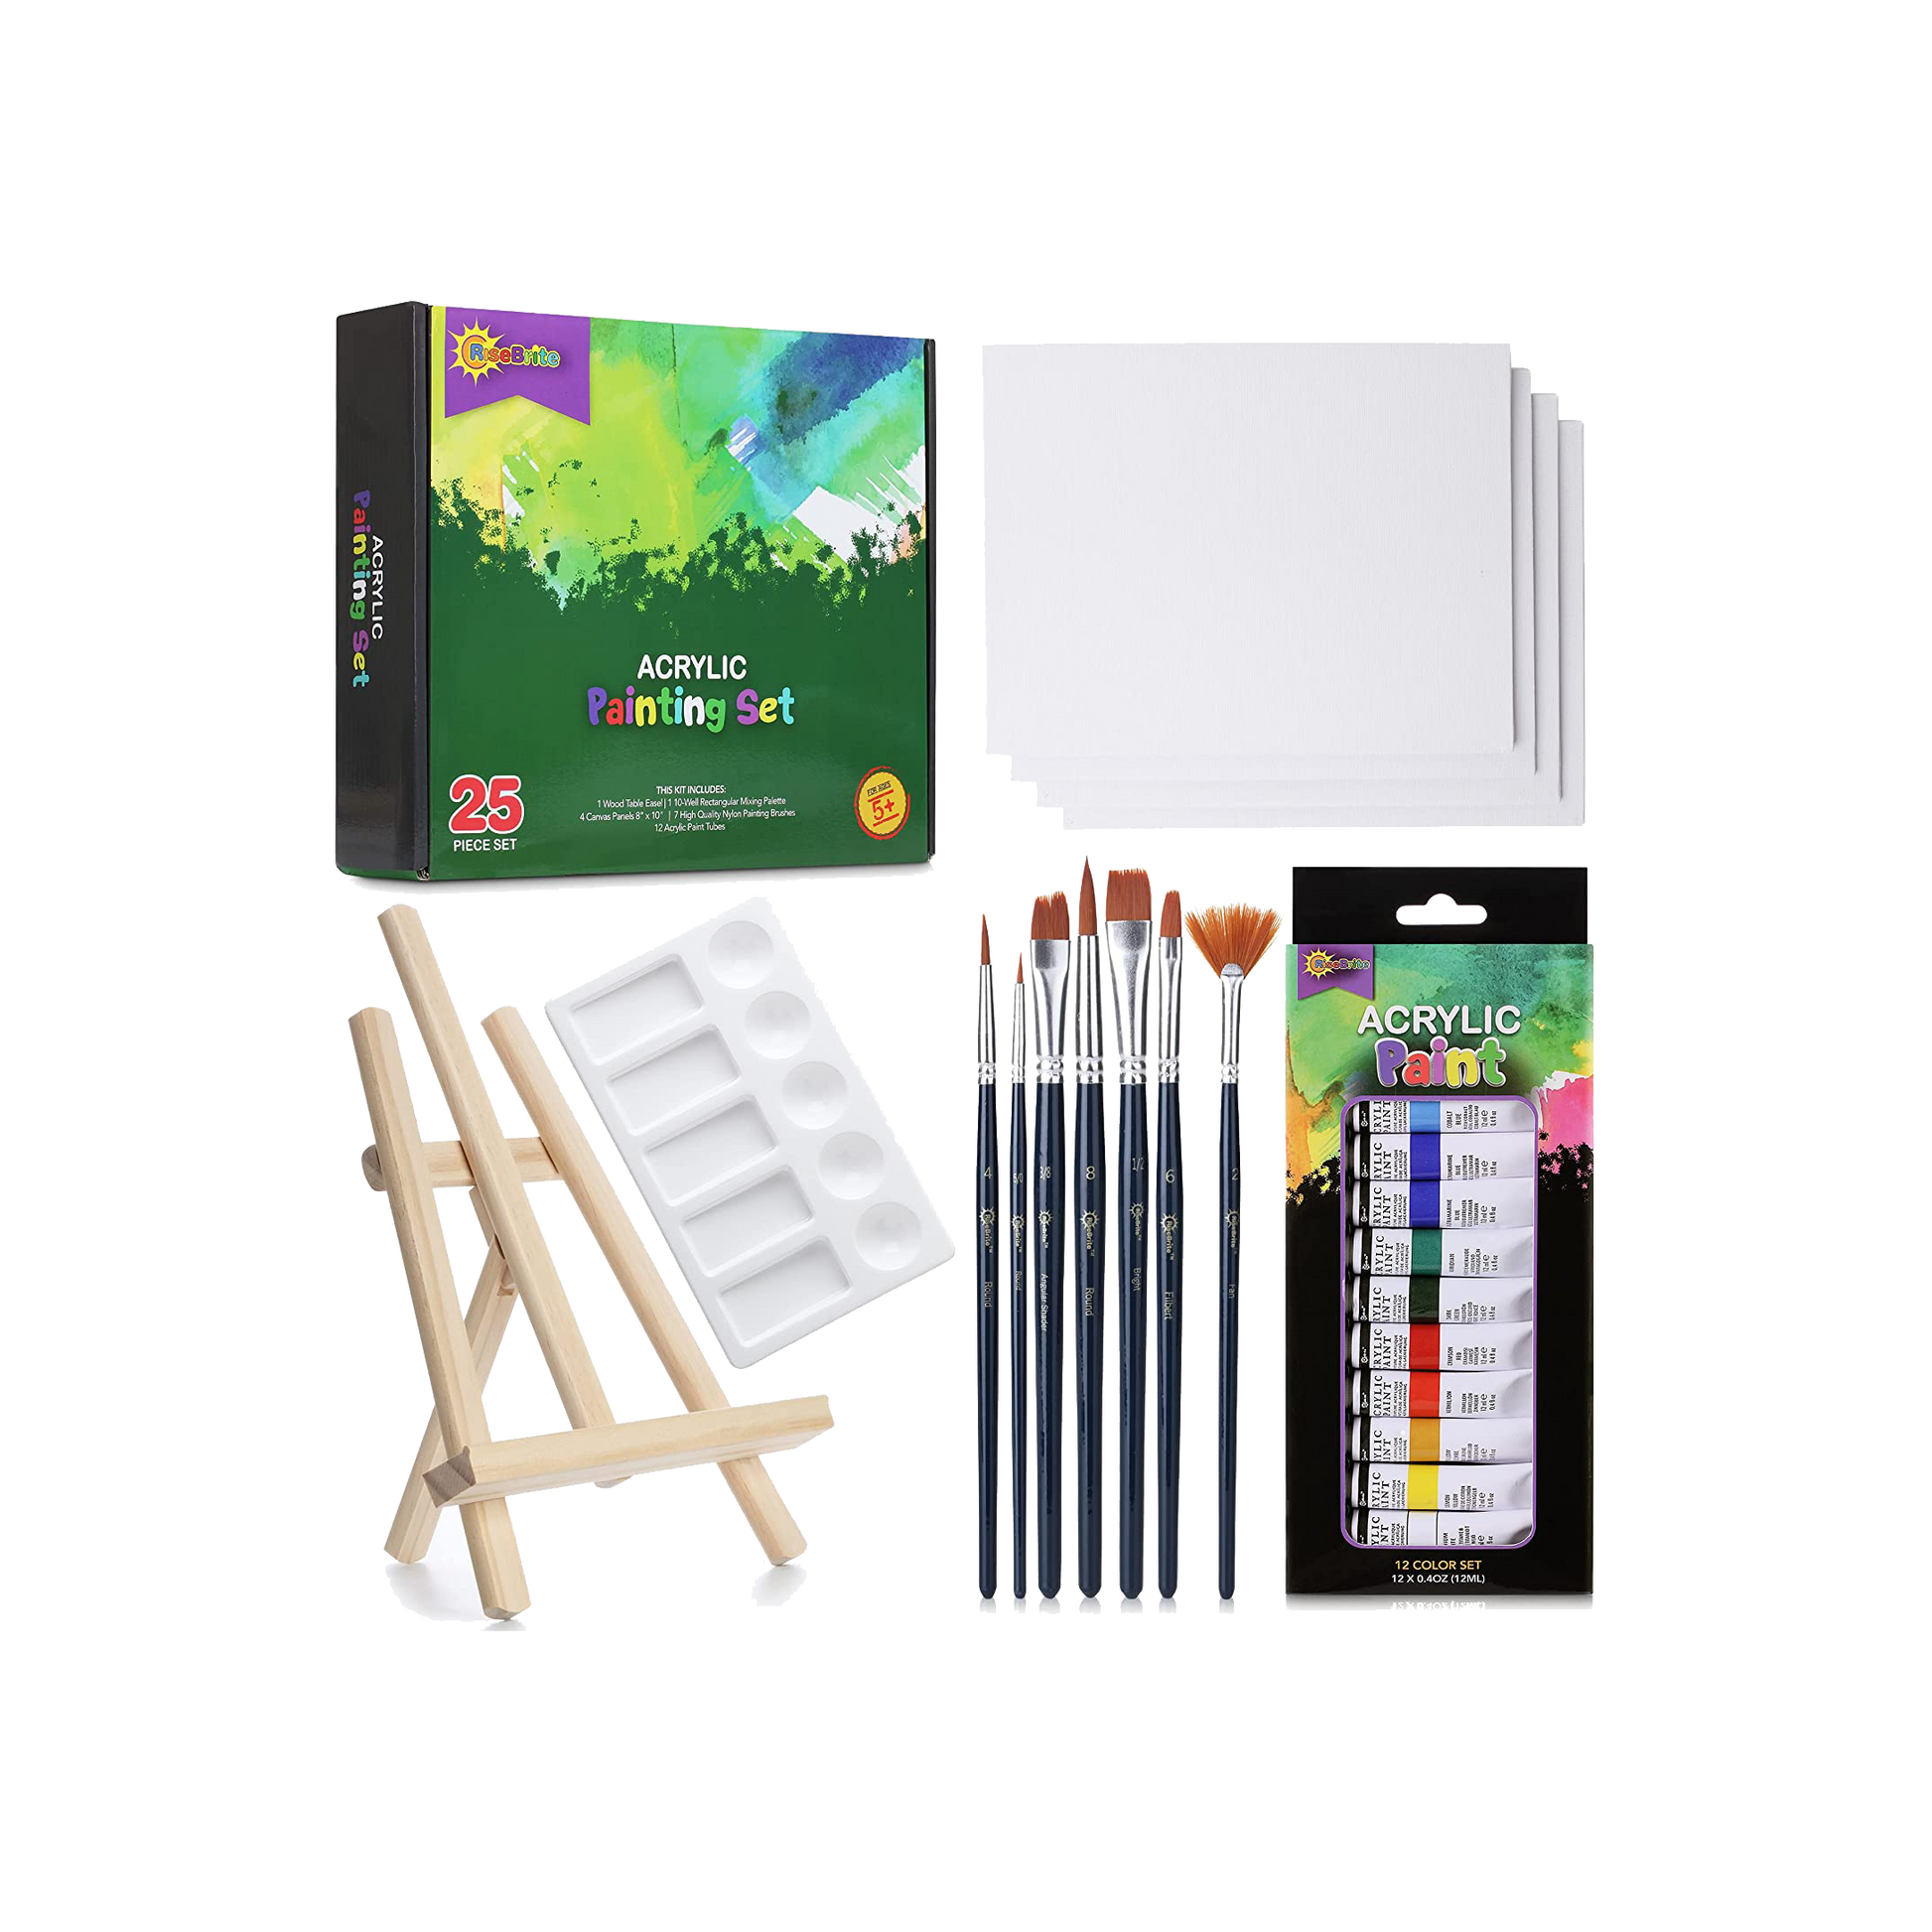 Acrylic Paint Set with Canvas Painting Kit: Gift Idea For